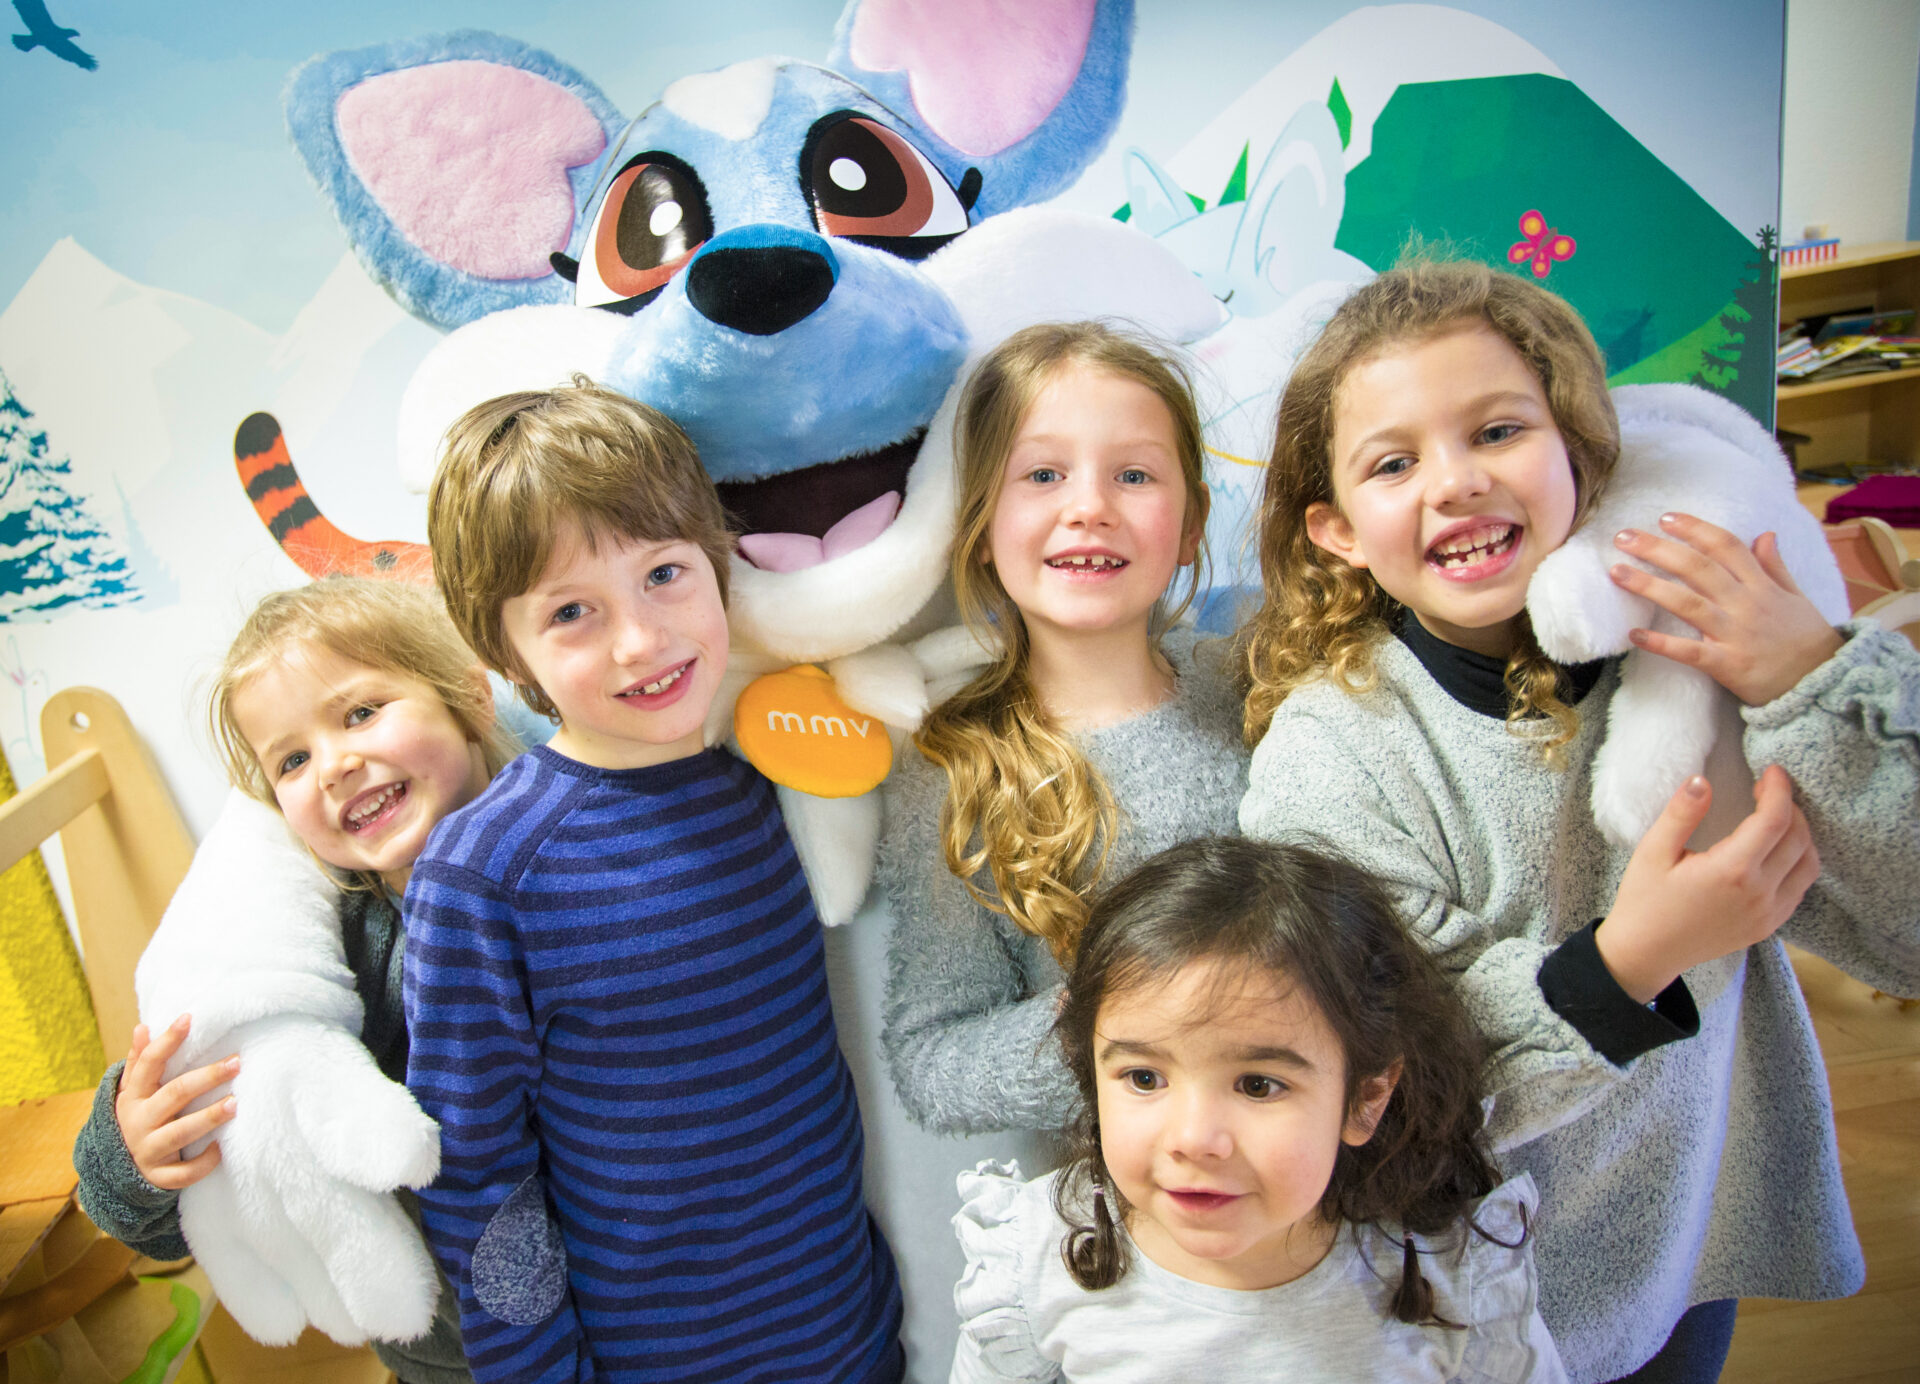 An image of the kids club mascot with kids at Hotel Club MMV Altitude